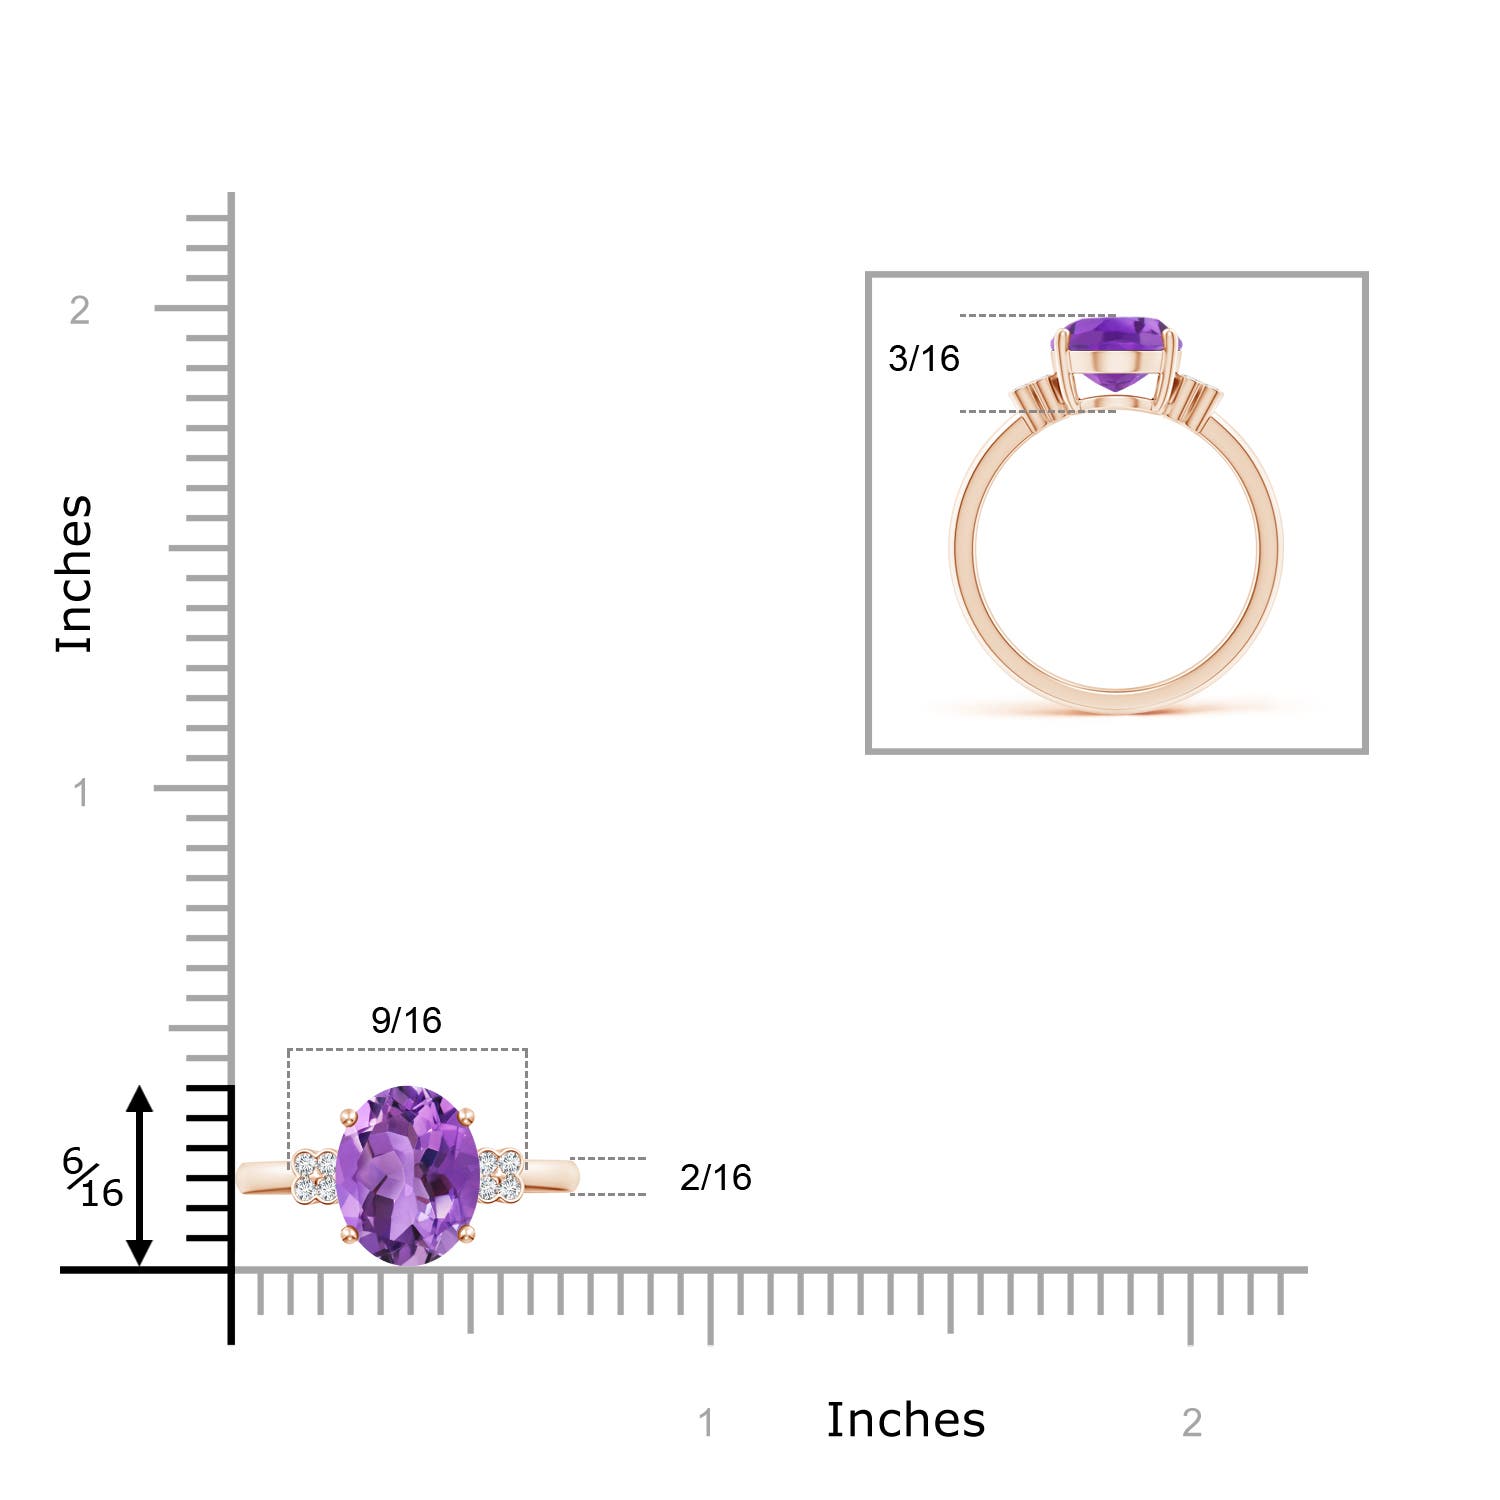 AA- Amethyst / 2.36 CT / 14 KT Rose Gold